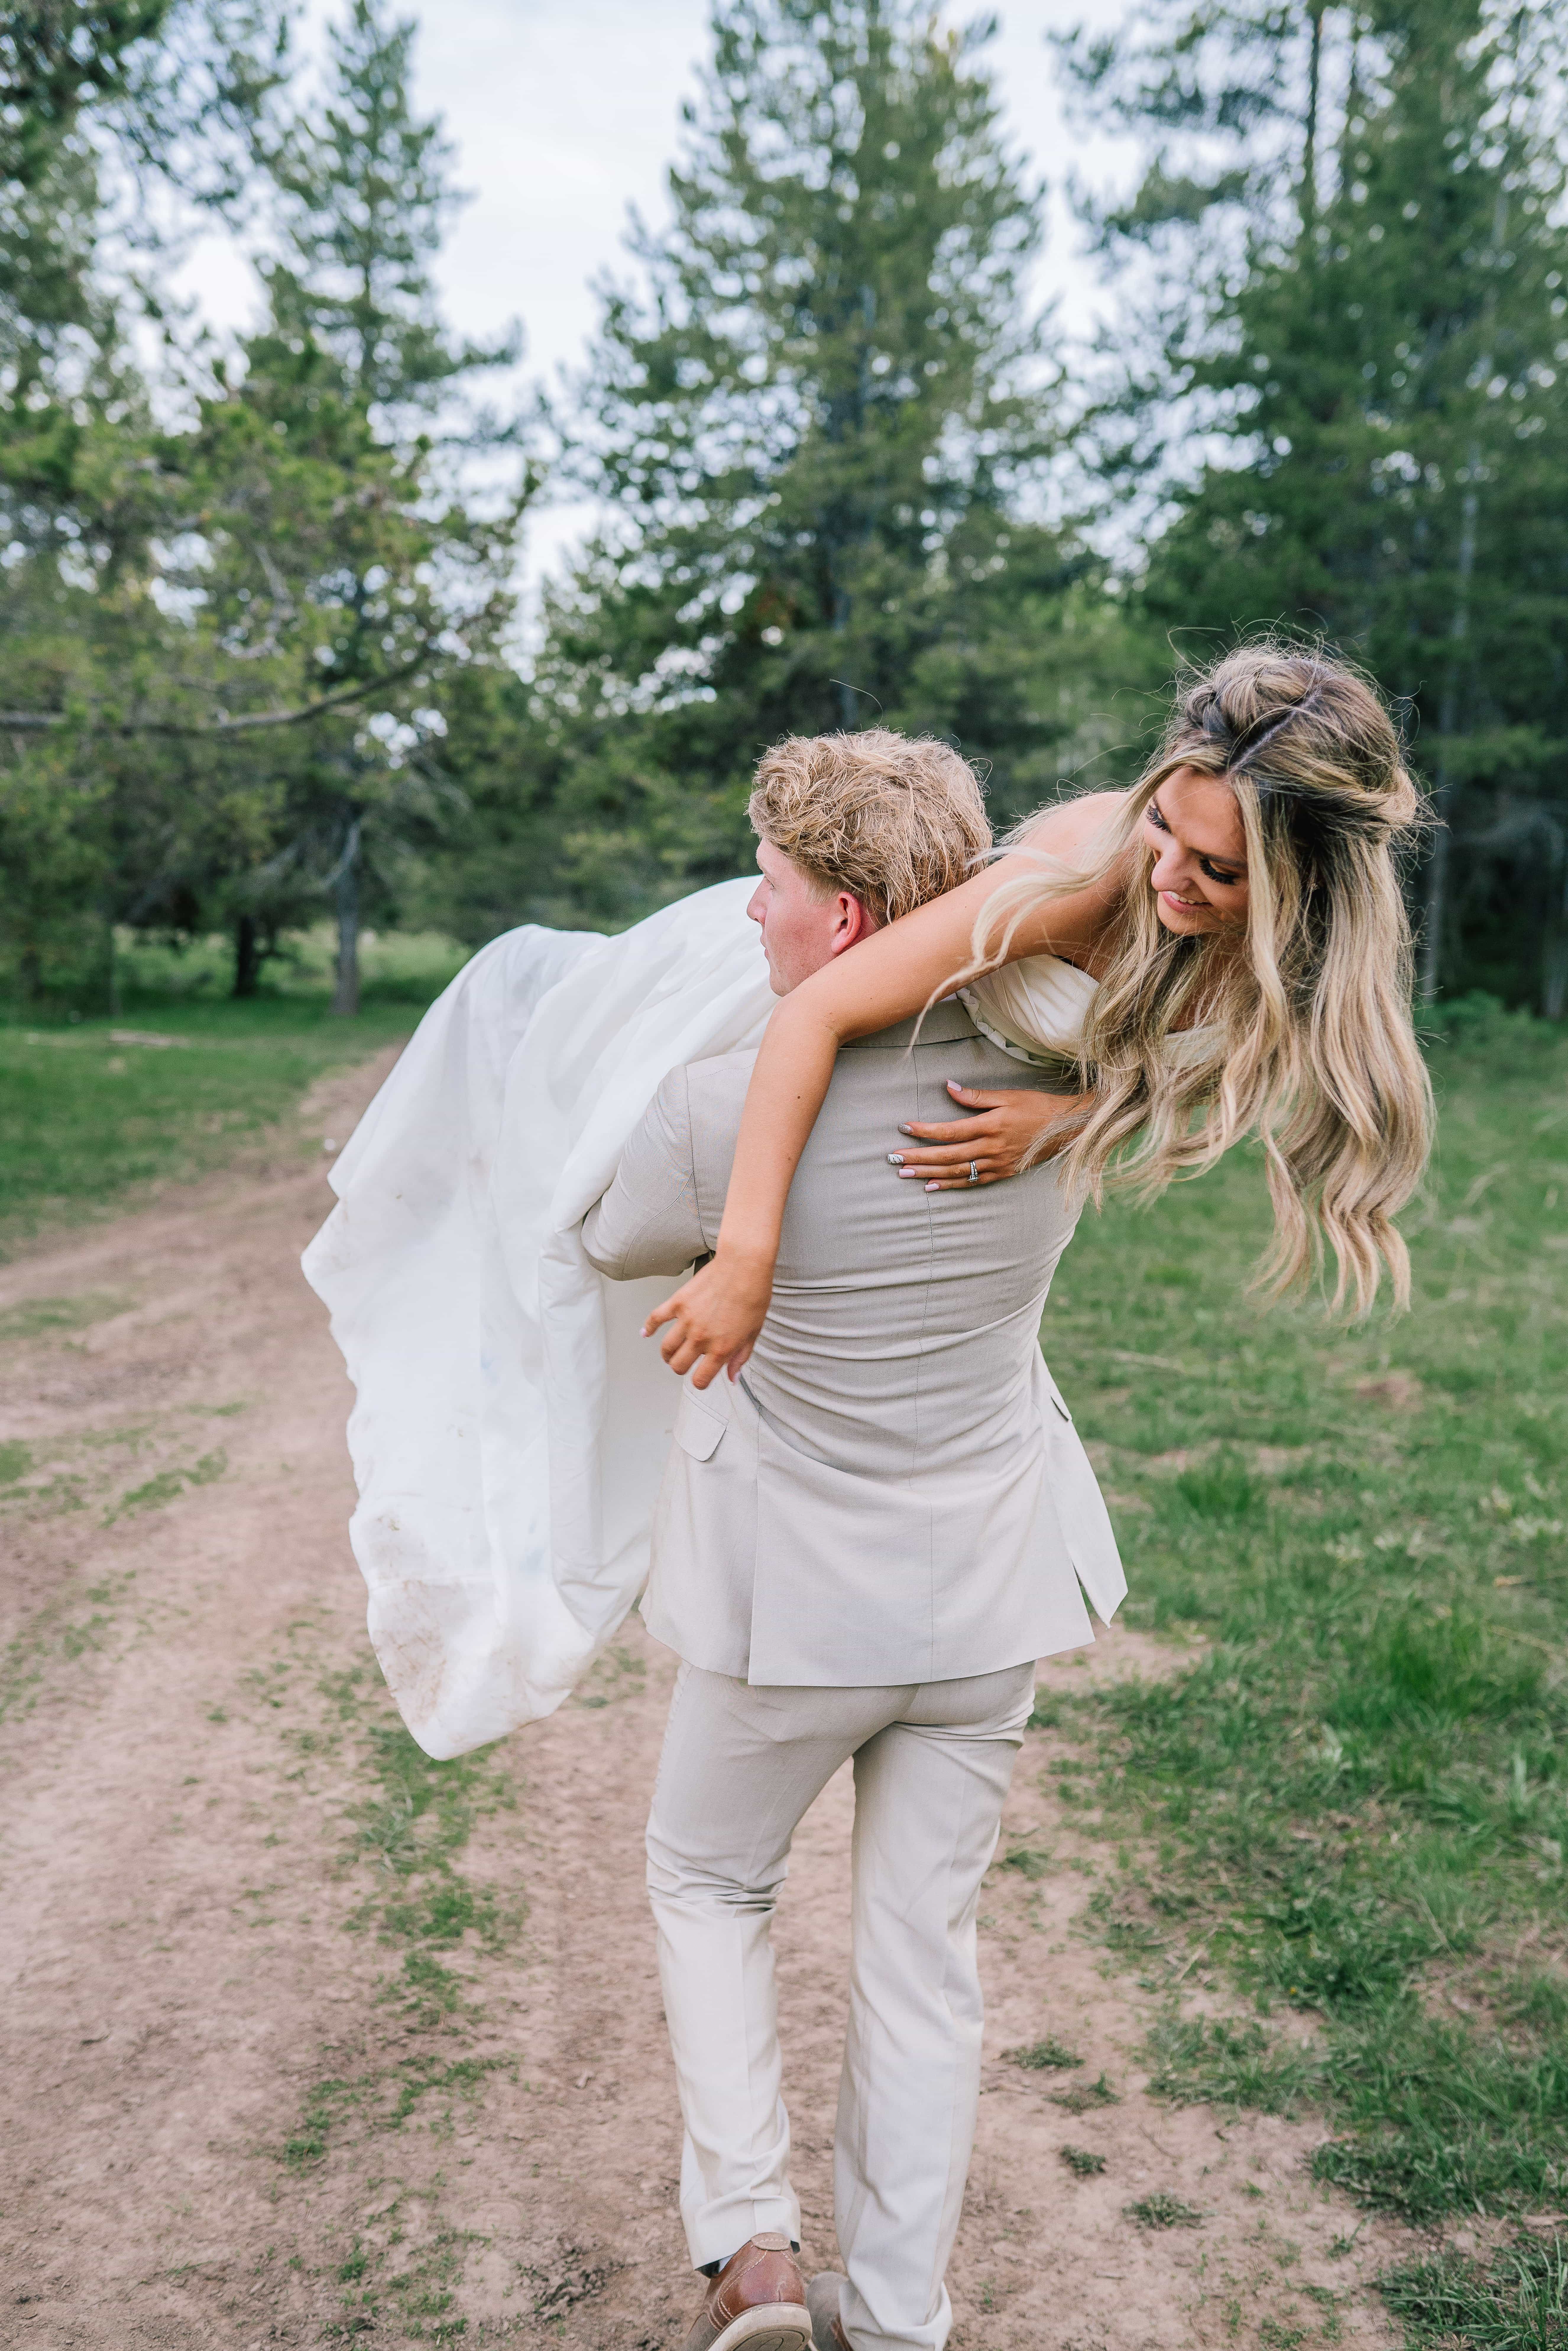 groom carrying bride off into the forest after getting married in tennessee budget friendly wedding after choosing top wedding planner